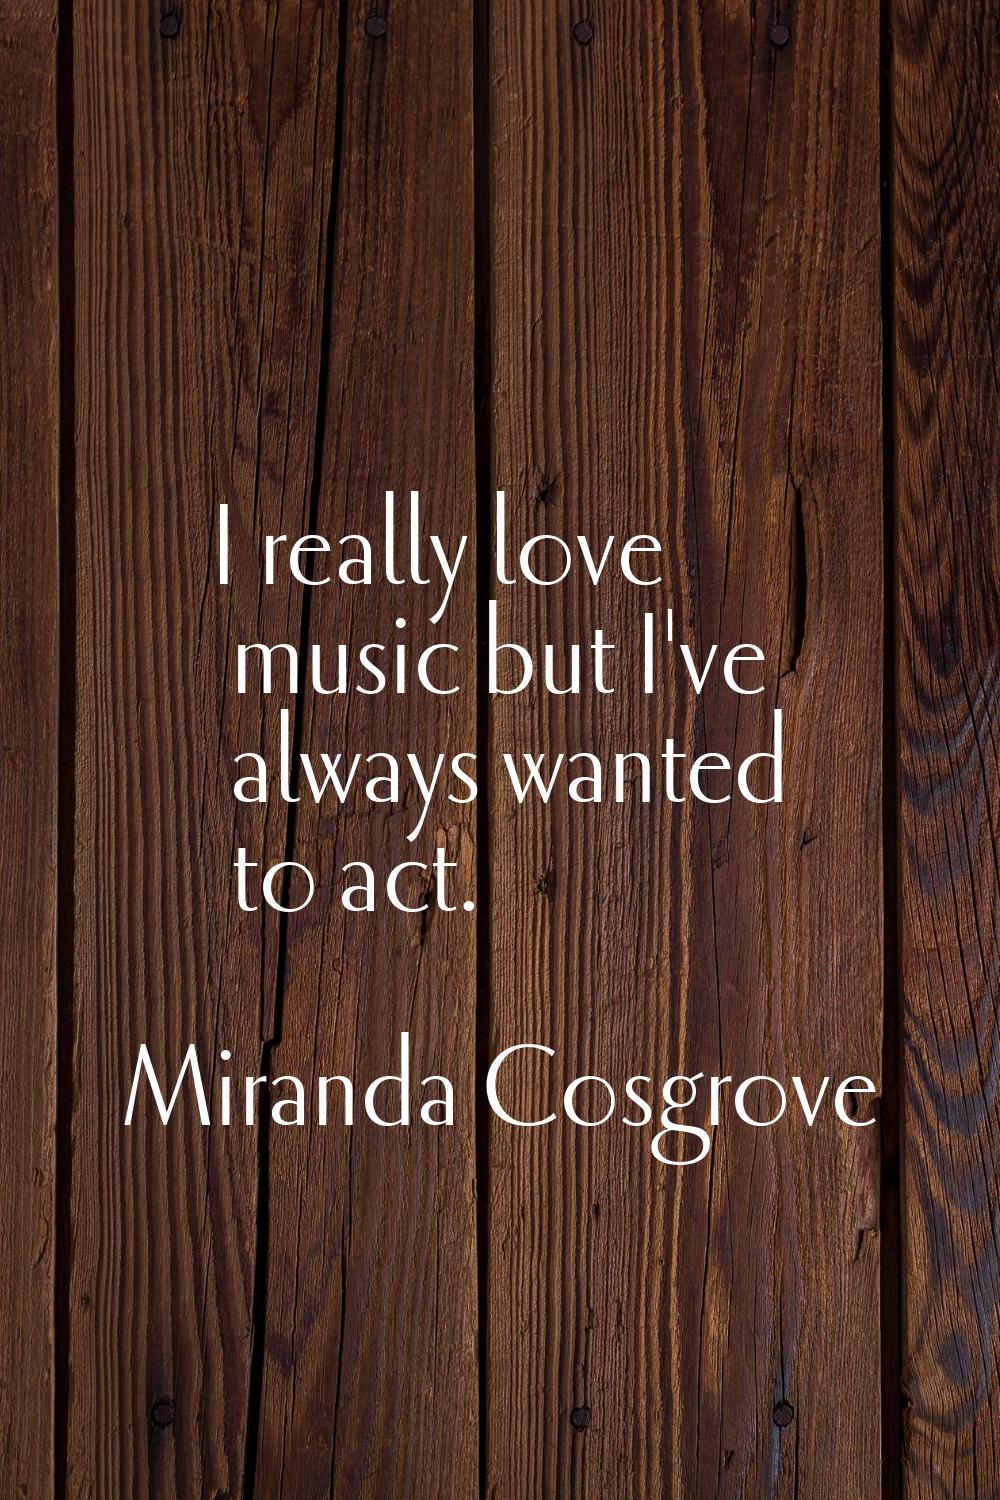 I really love music but I've always wanted to act.